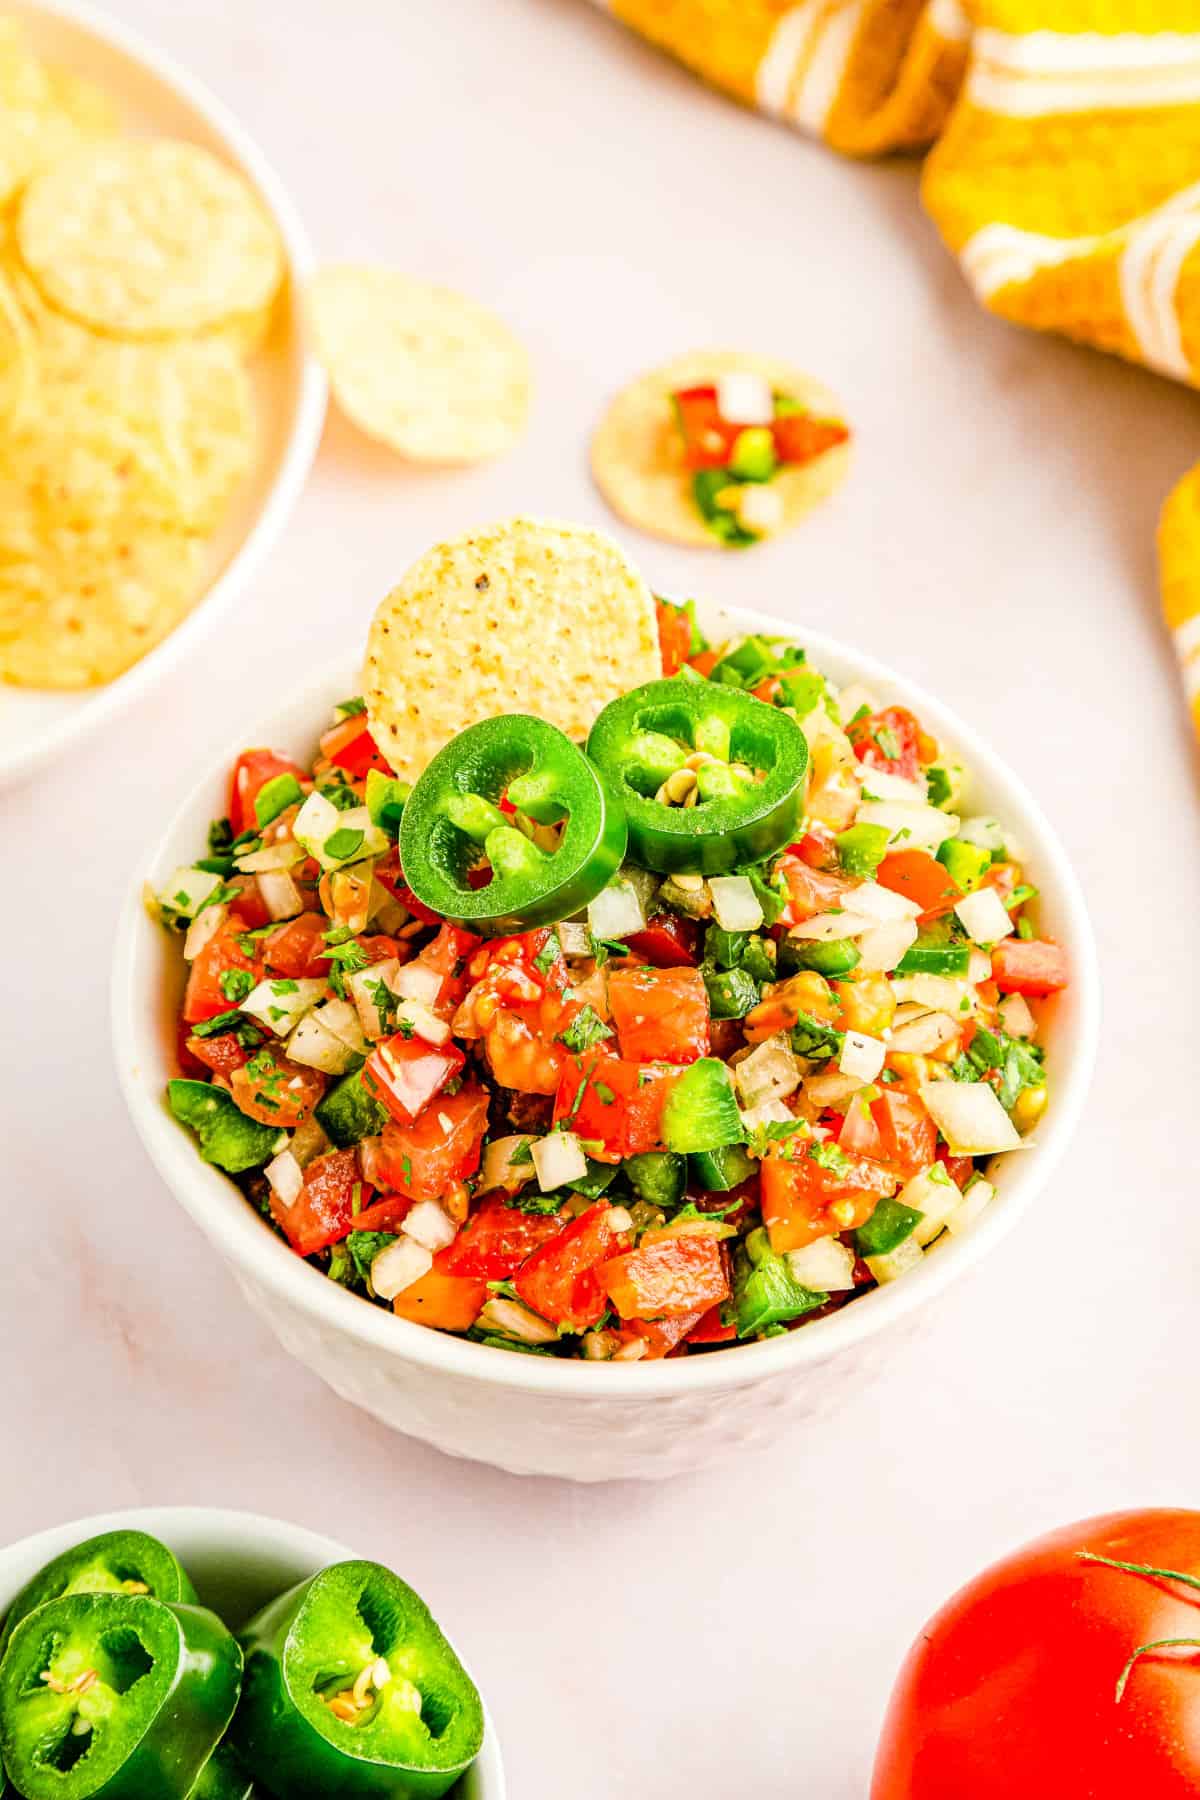 Homemade Pico de Gallo in a white bowl garnished with sliced jalapeño.